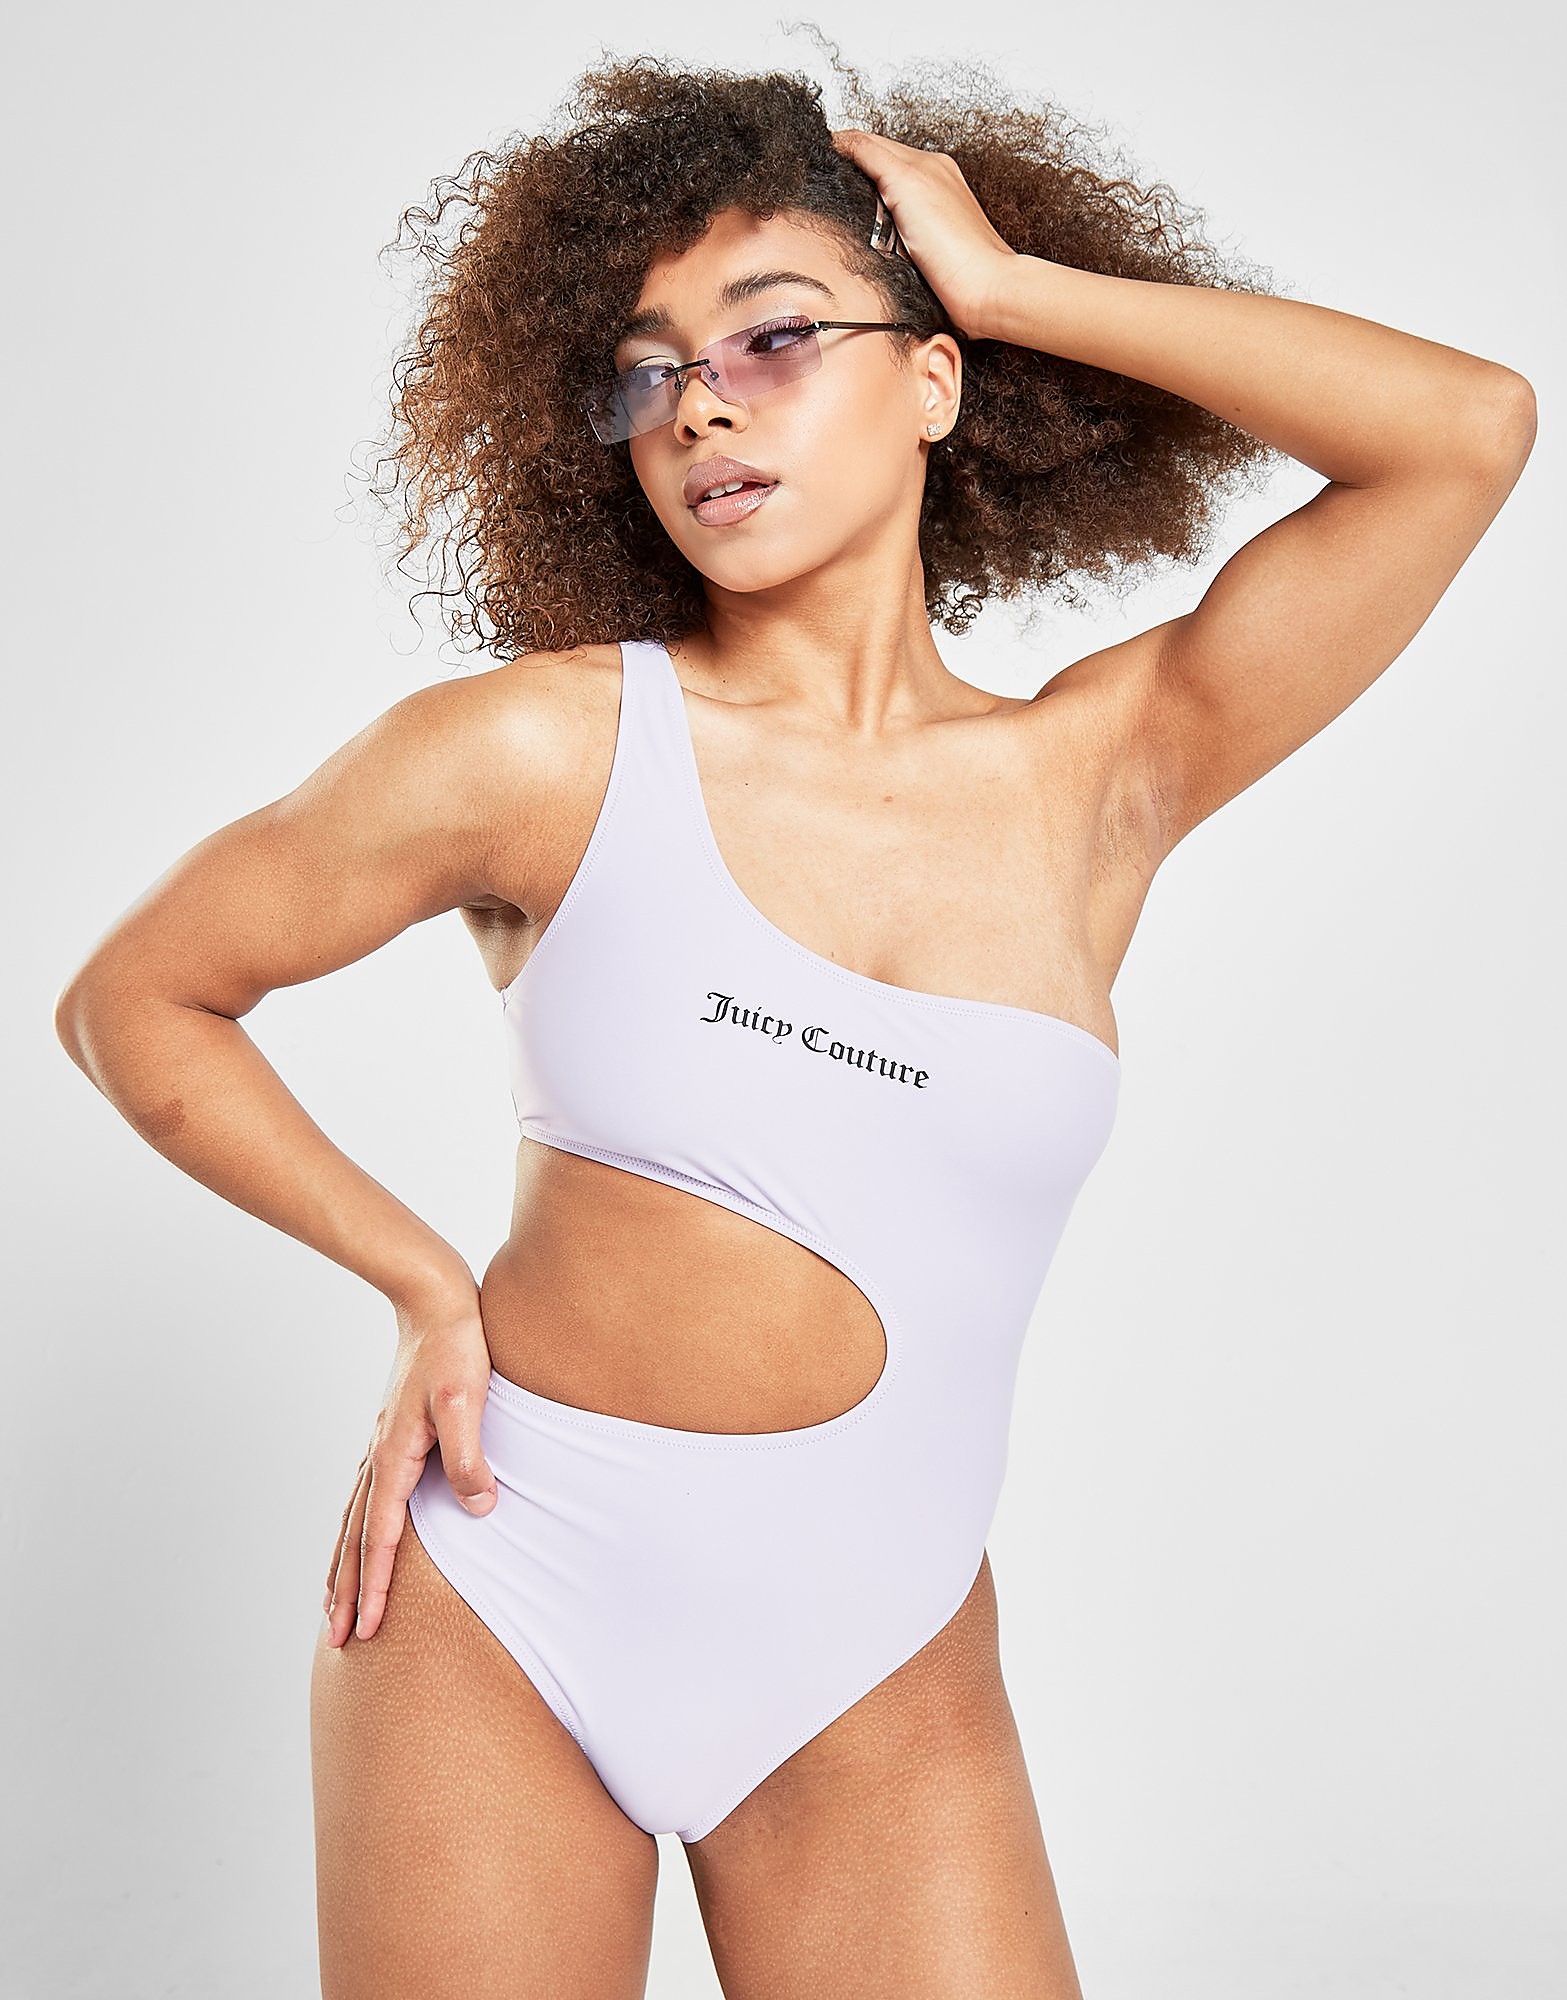 Juicy couture cut out swimsuit - womens, violetti, juicy couture